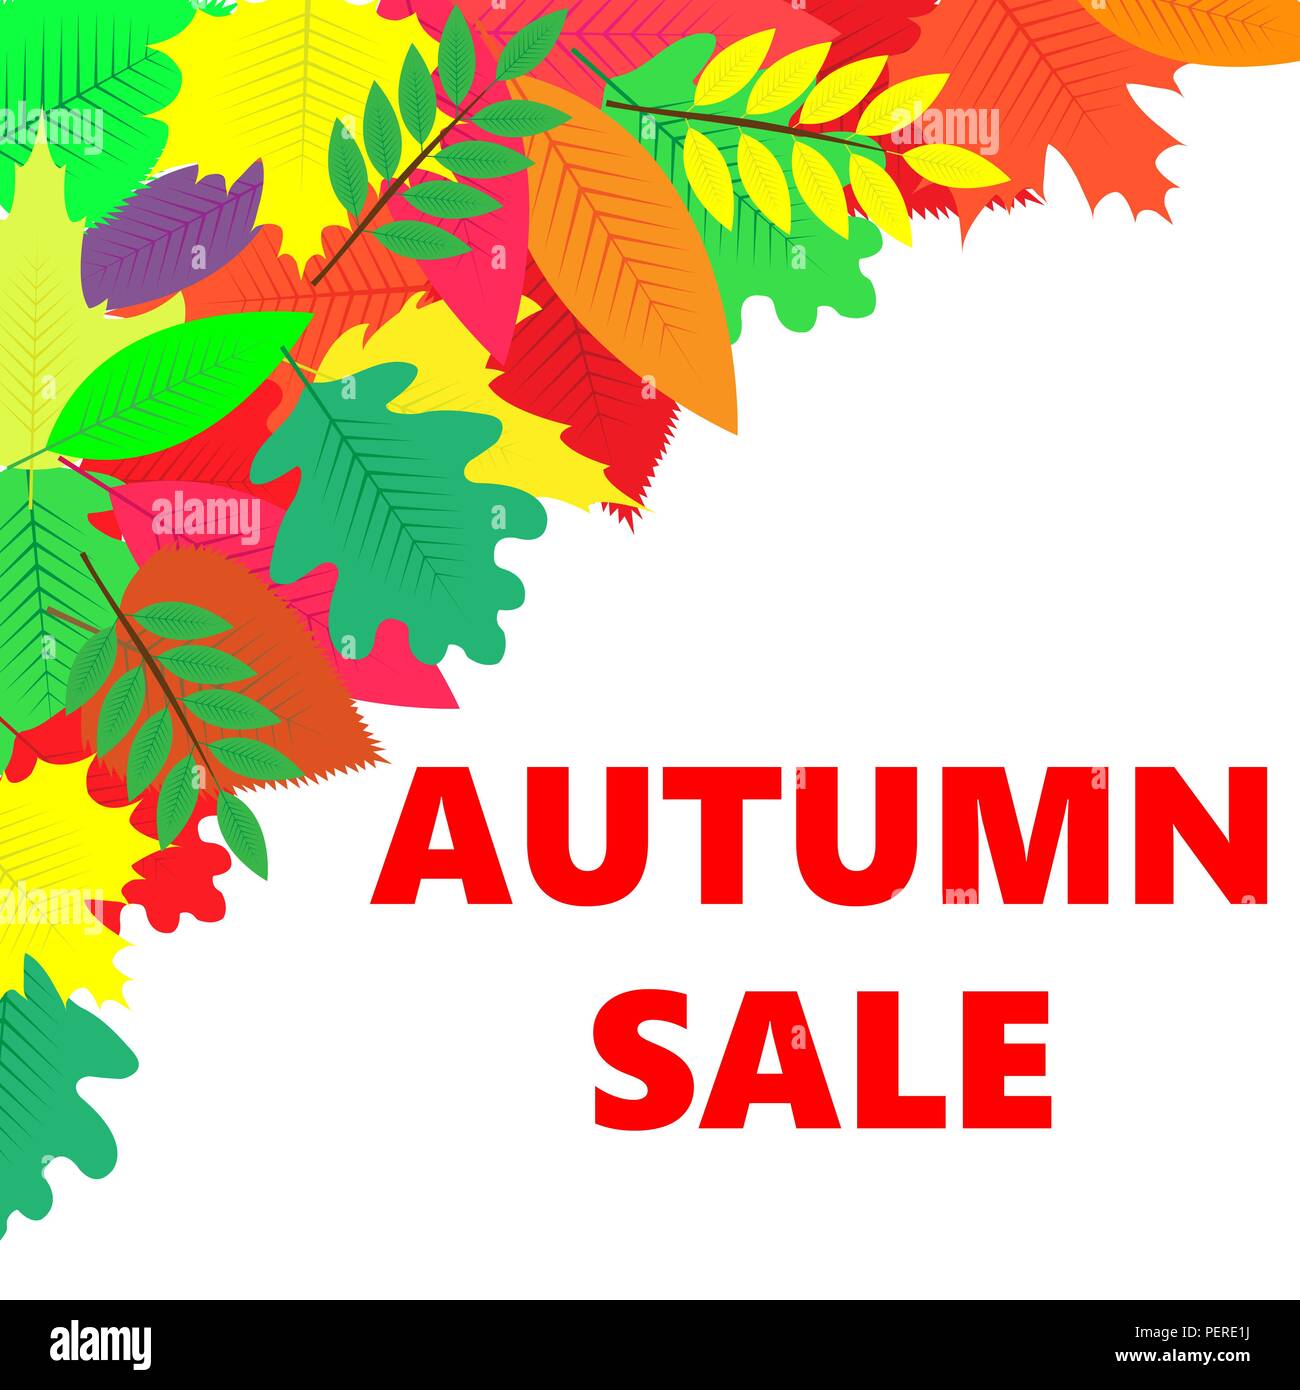 Sales banner with autumn leaves  Stock Vector